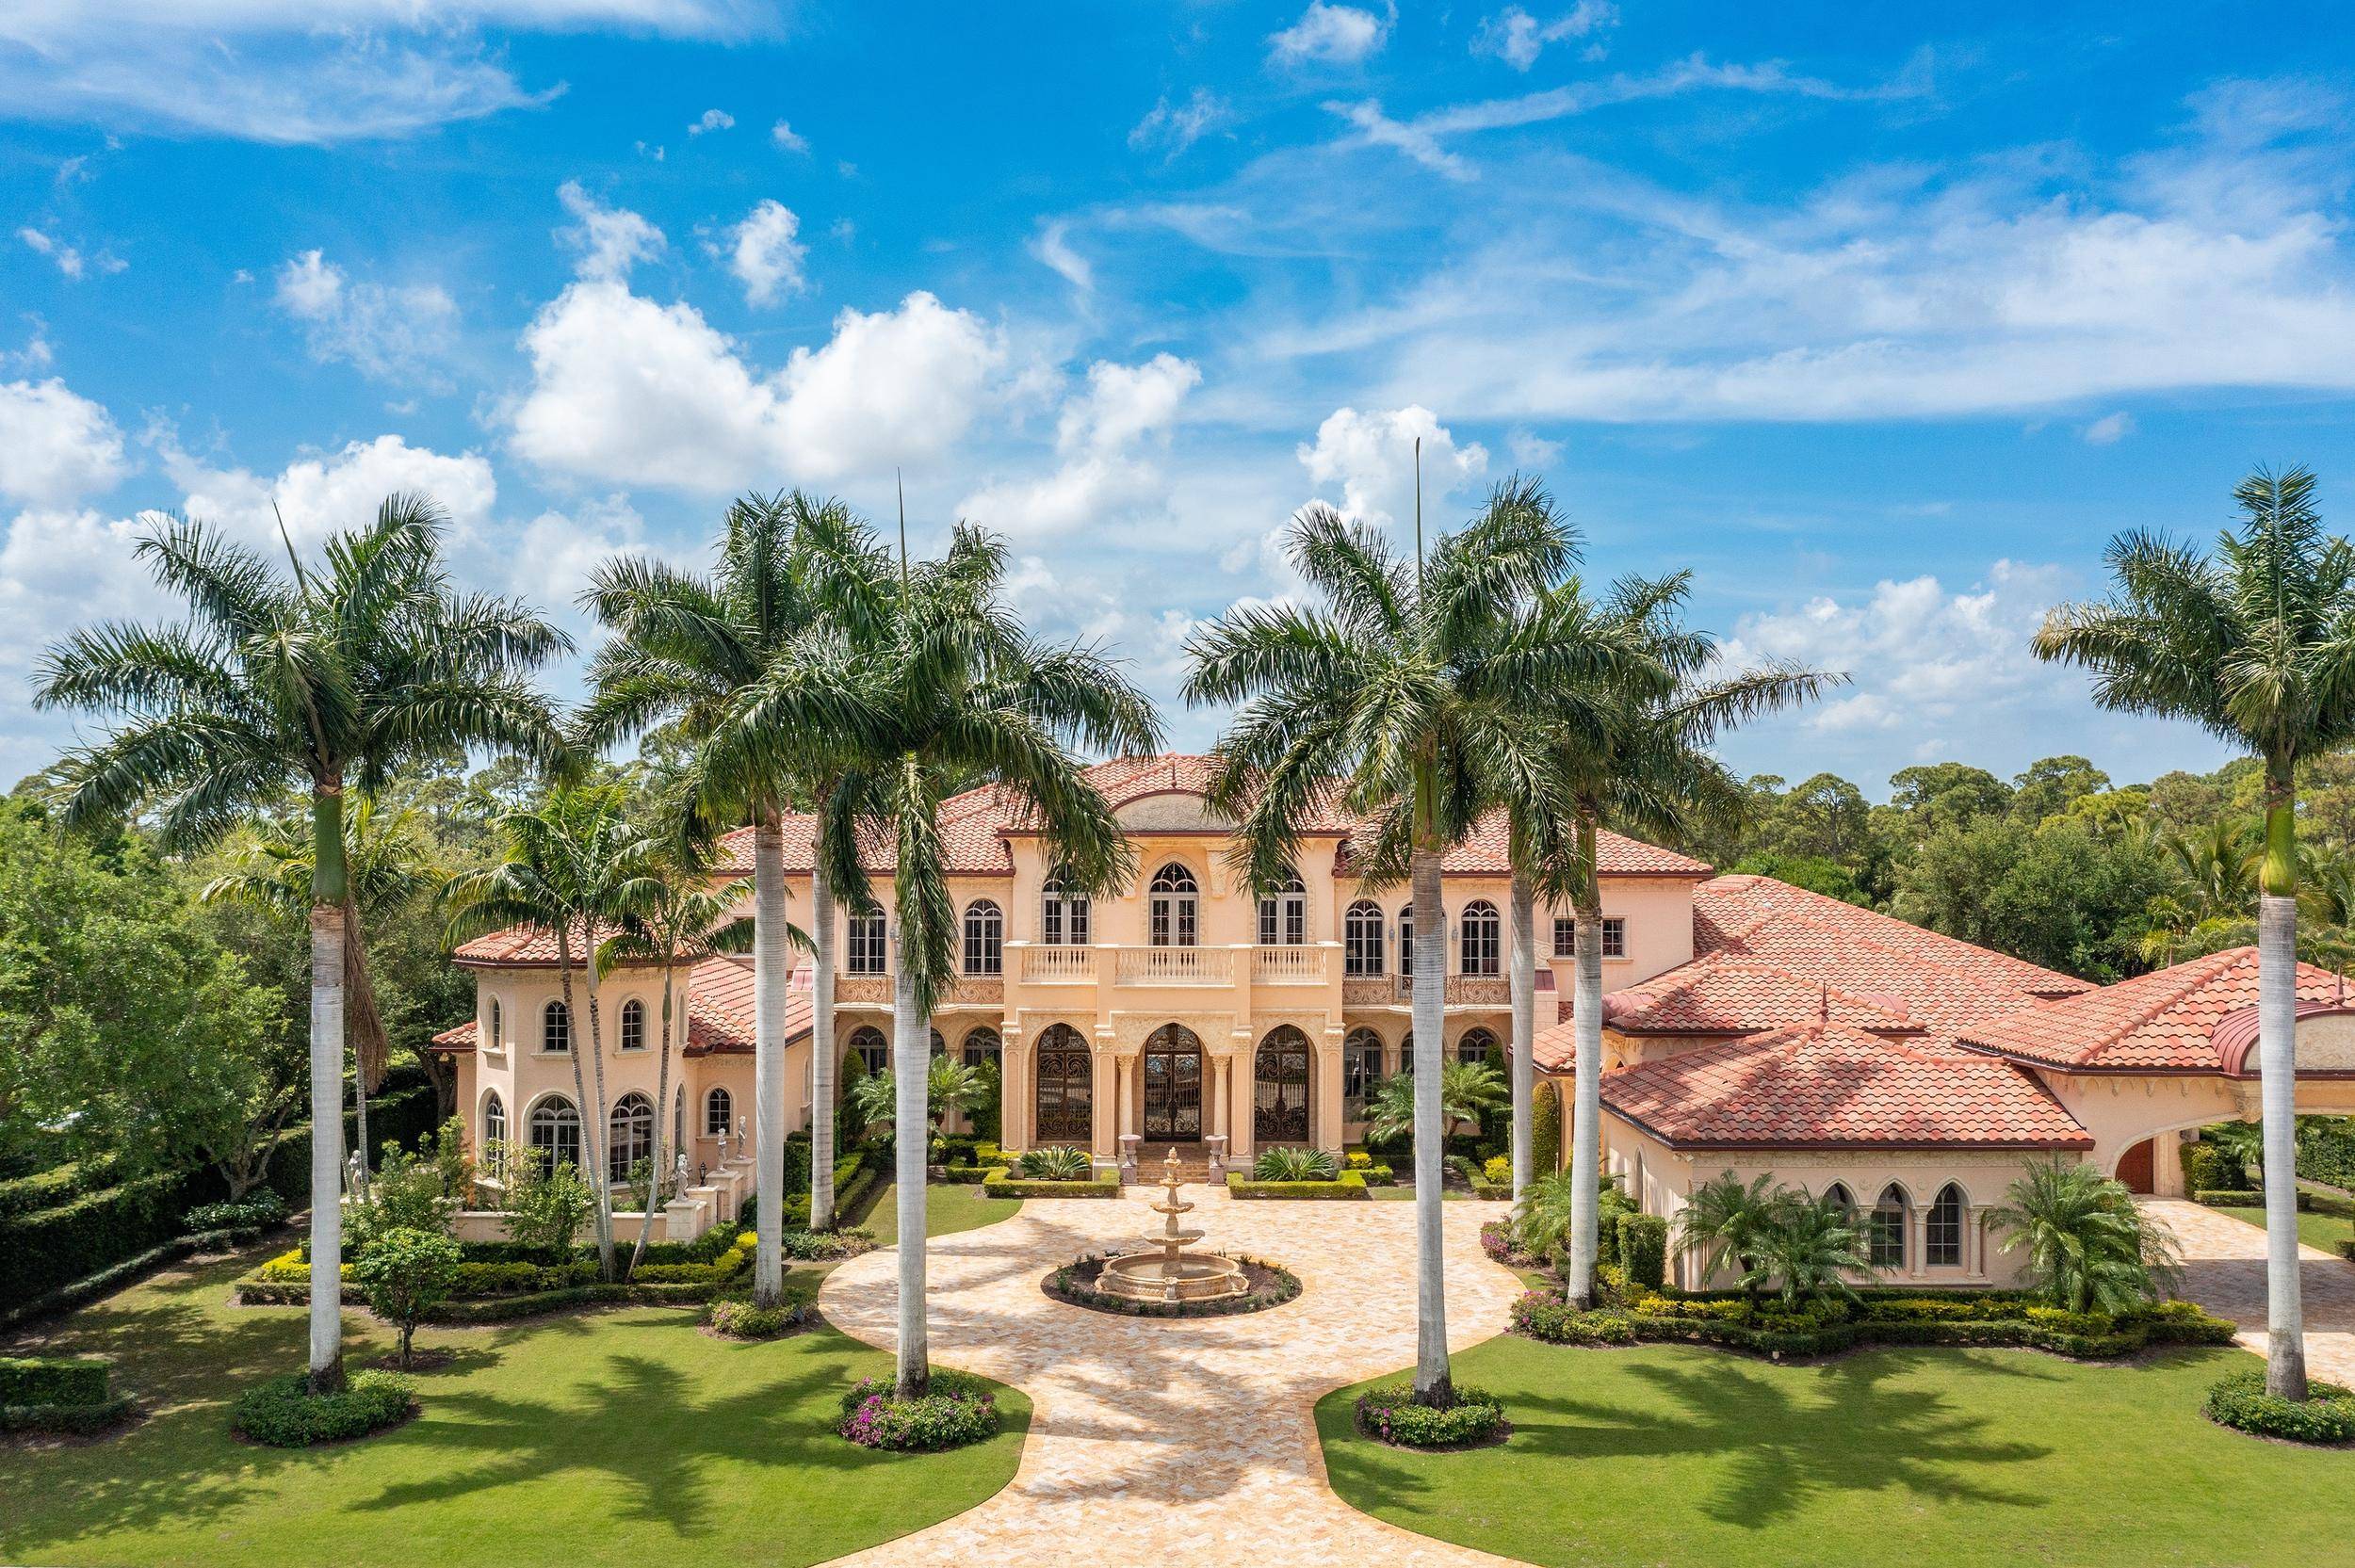 Few residential properties complement their natural surroundings quite like this epic, Mediterranean style masterpiece, seamlessly tucked into a storied slice of South Florida.